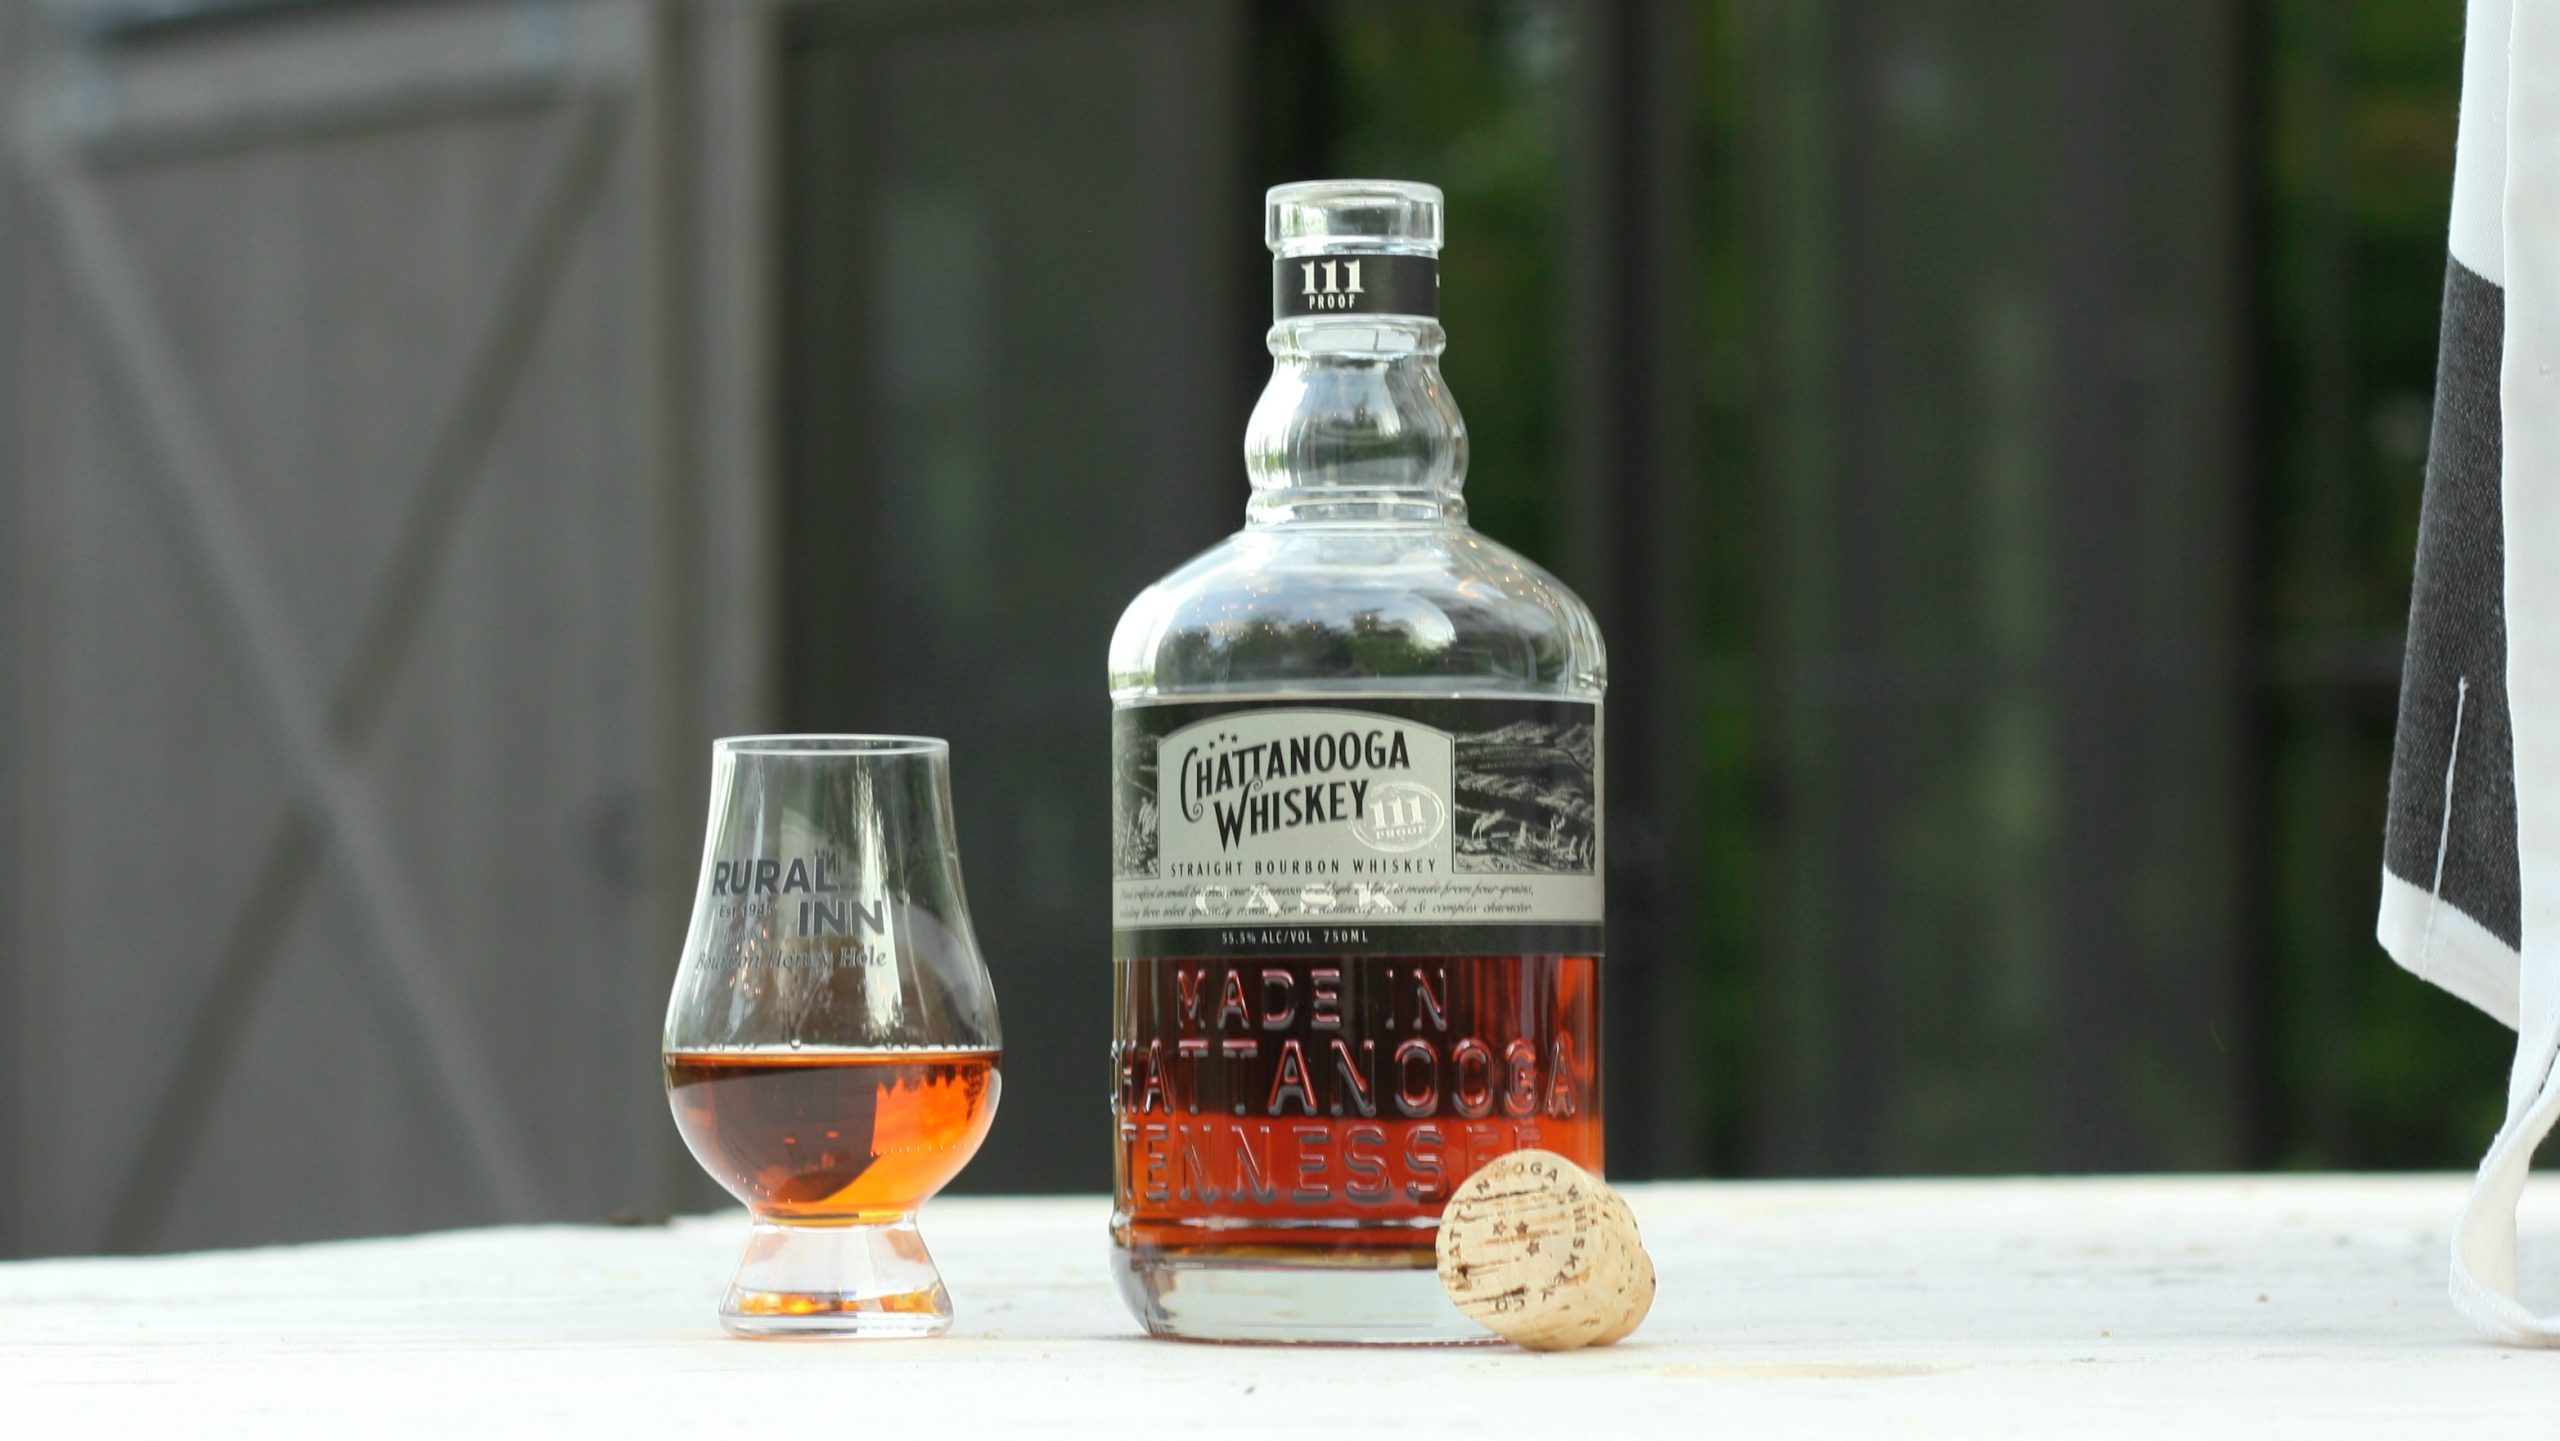 Chattanooga Whiskey Tennessee Cask 111 Proof High Malt Review